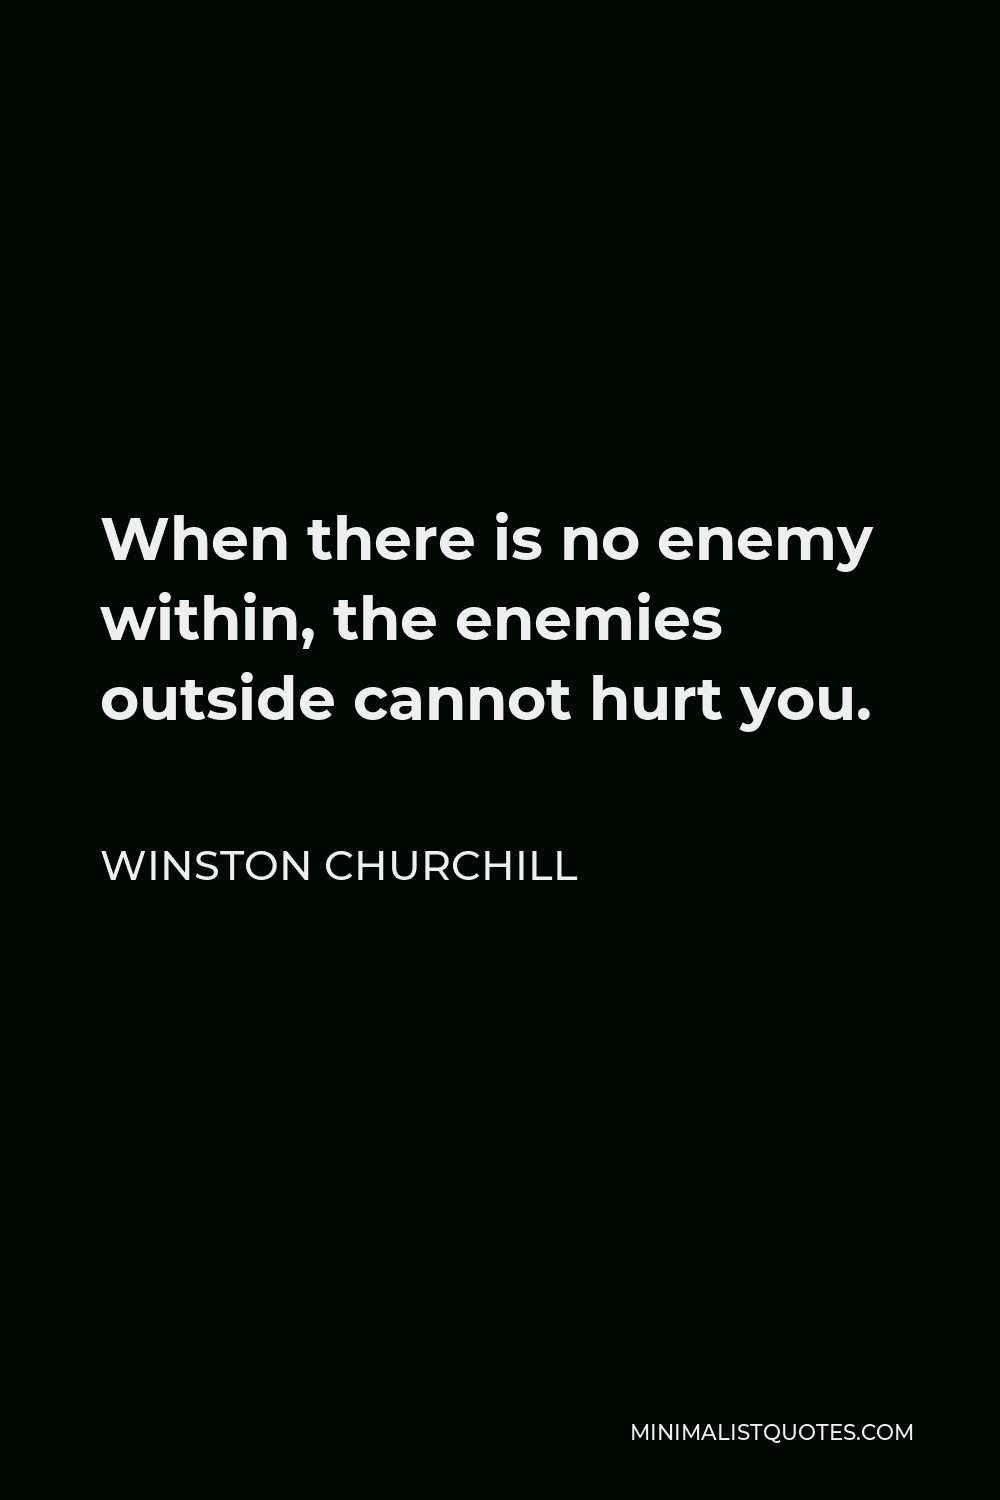 Winston Churchill Quote - When there is no enemy within, the enemies outside cannot hurt you.